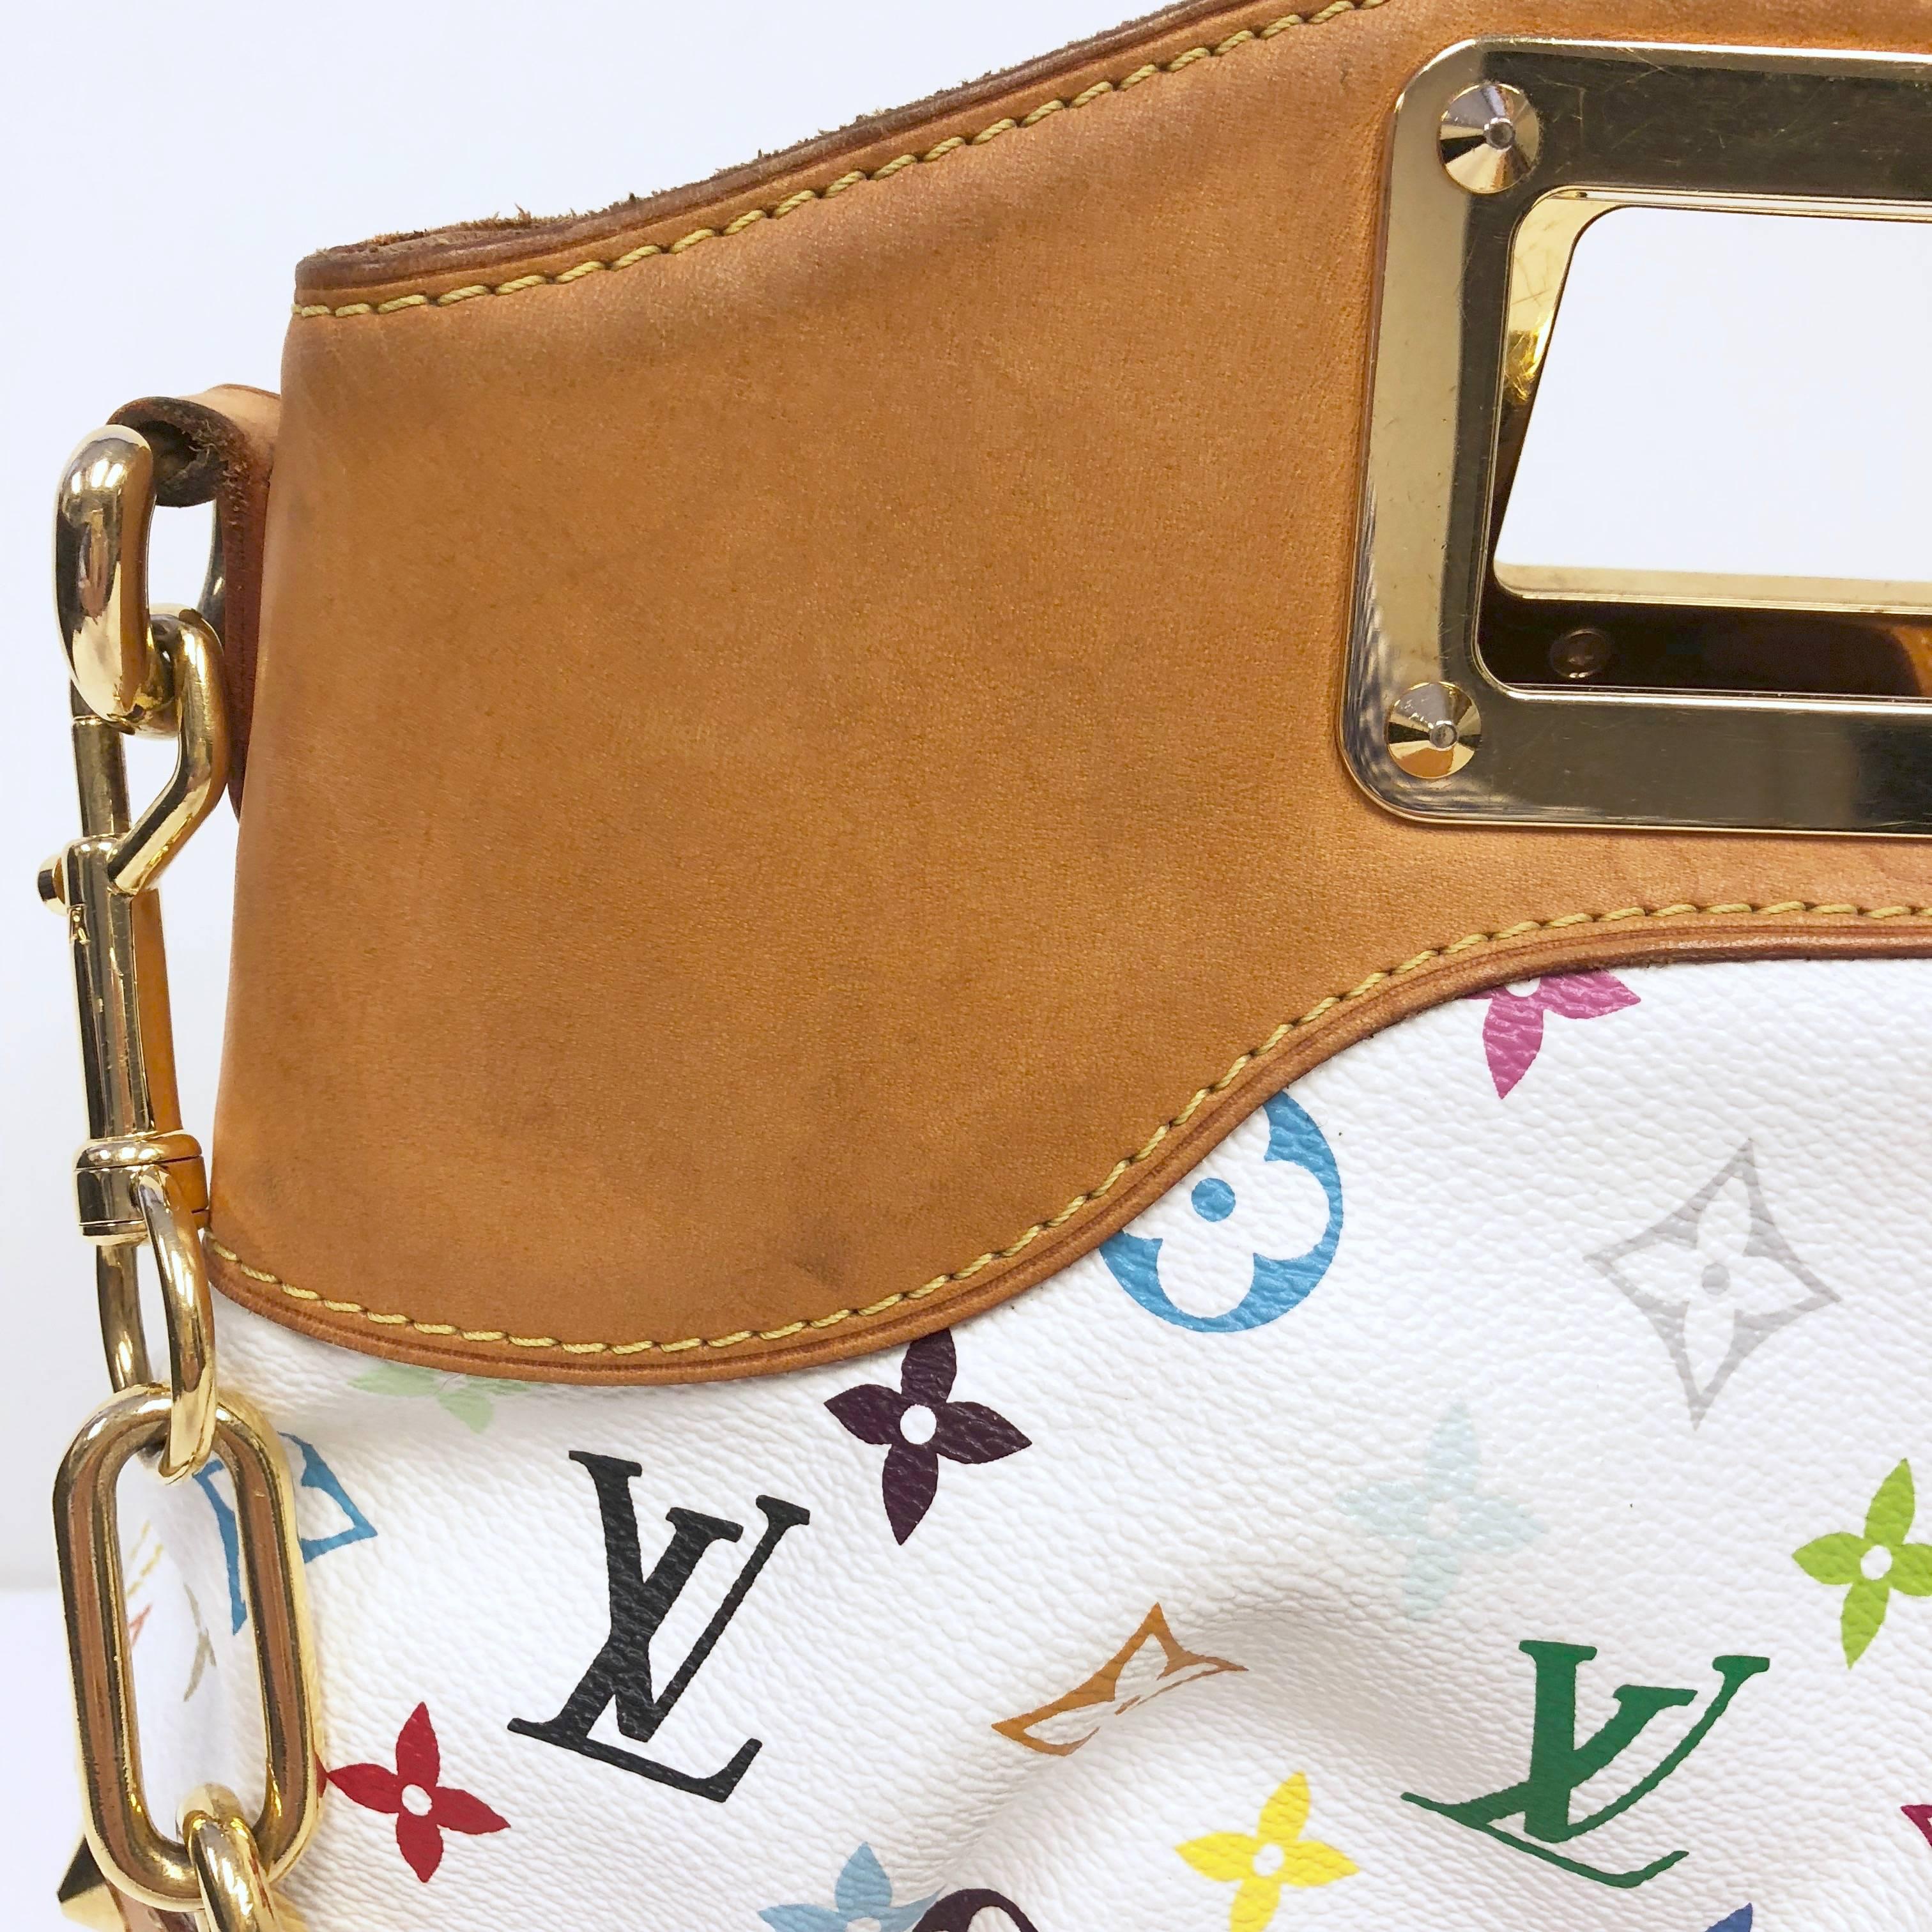 Louis Vuitton Judy MM Bag featuring Takashi Murakami's popular white monogram multicolor print. Stunning handbag with a twist of style and fun. Accented with vachetta leather details and polished gold-tone hardware. Feminine design with an inset